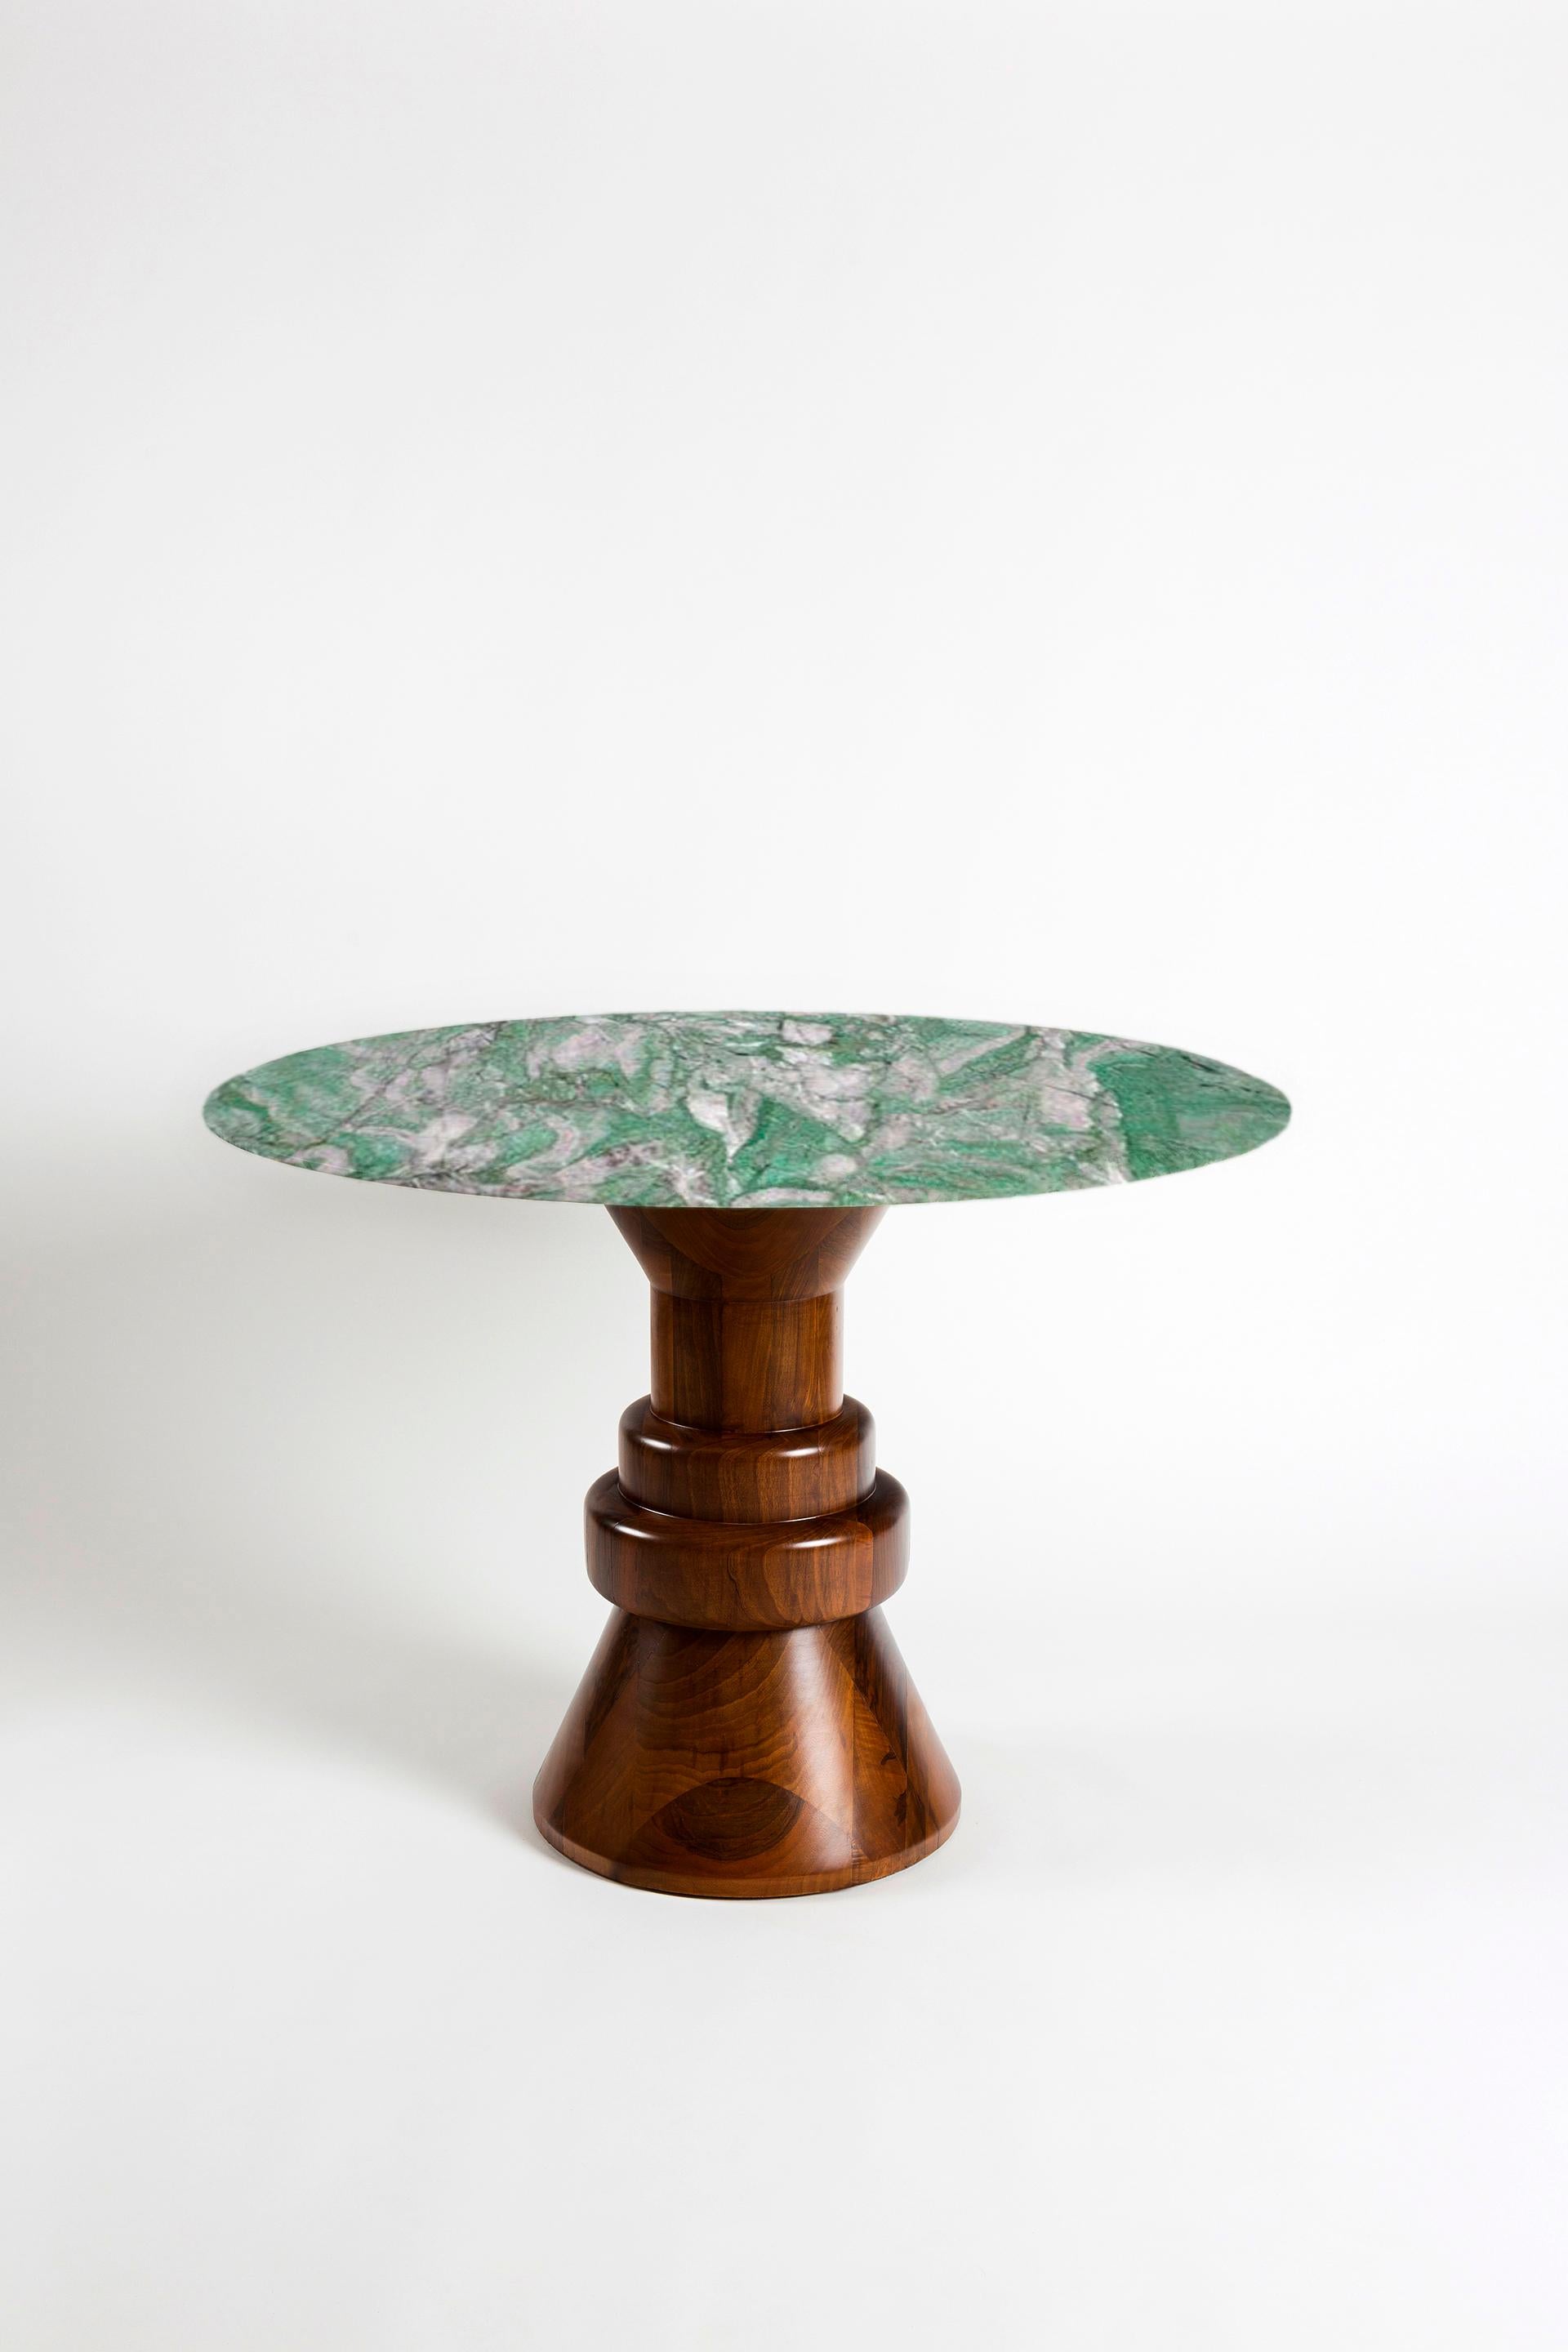 Contemporary 21st Century Pink Marble Round Dining Table with Sculptural Green Wooden Base For Sale